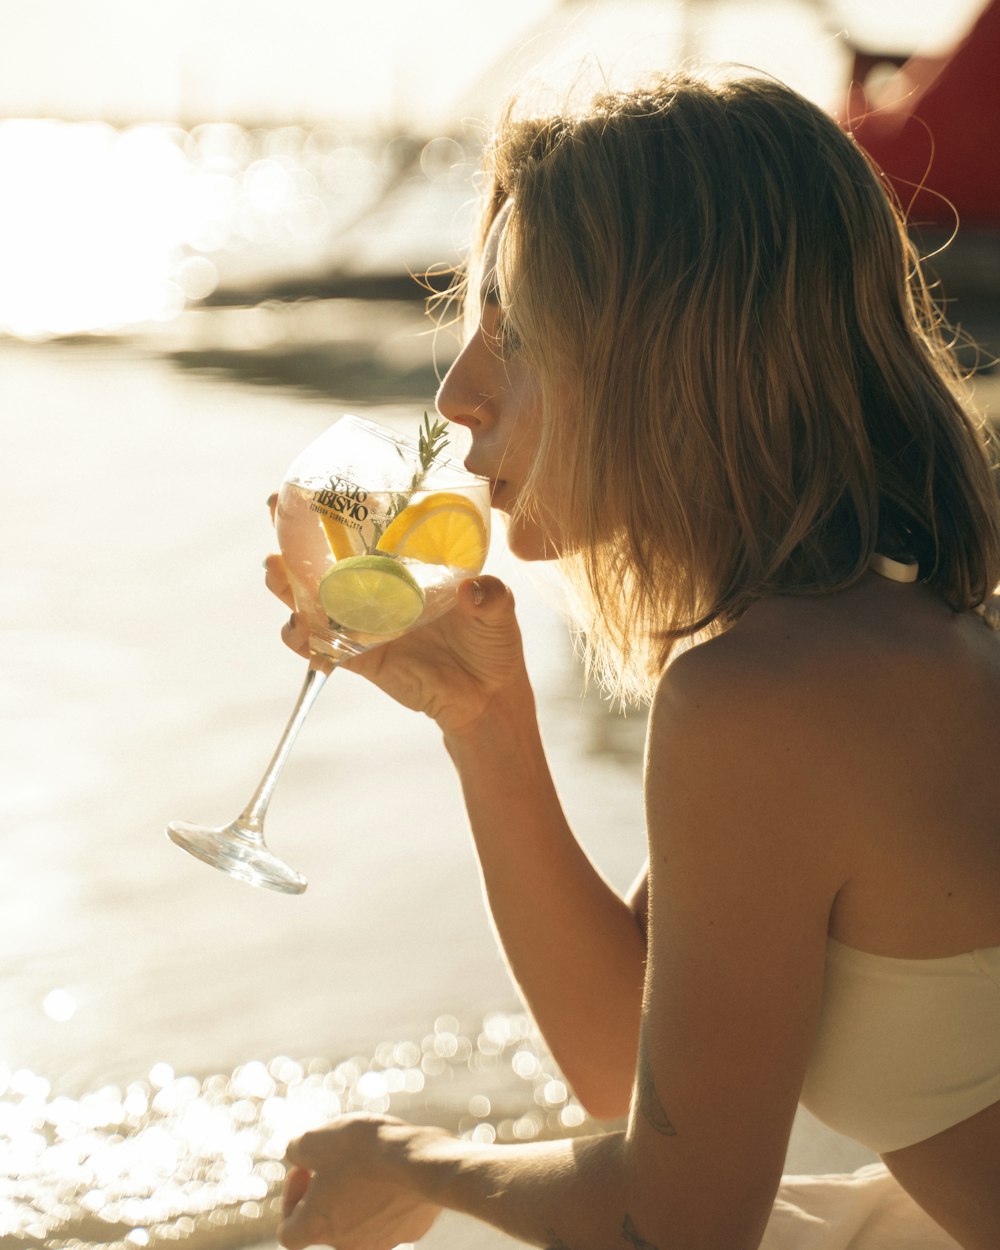 a woman sitting on the beach drinking a glass of wine